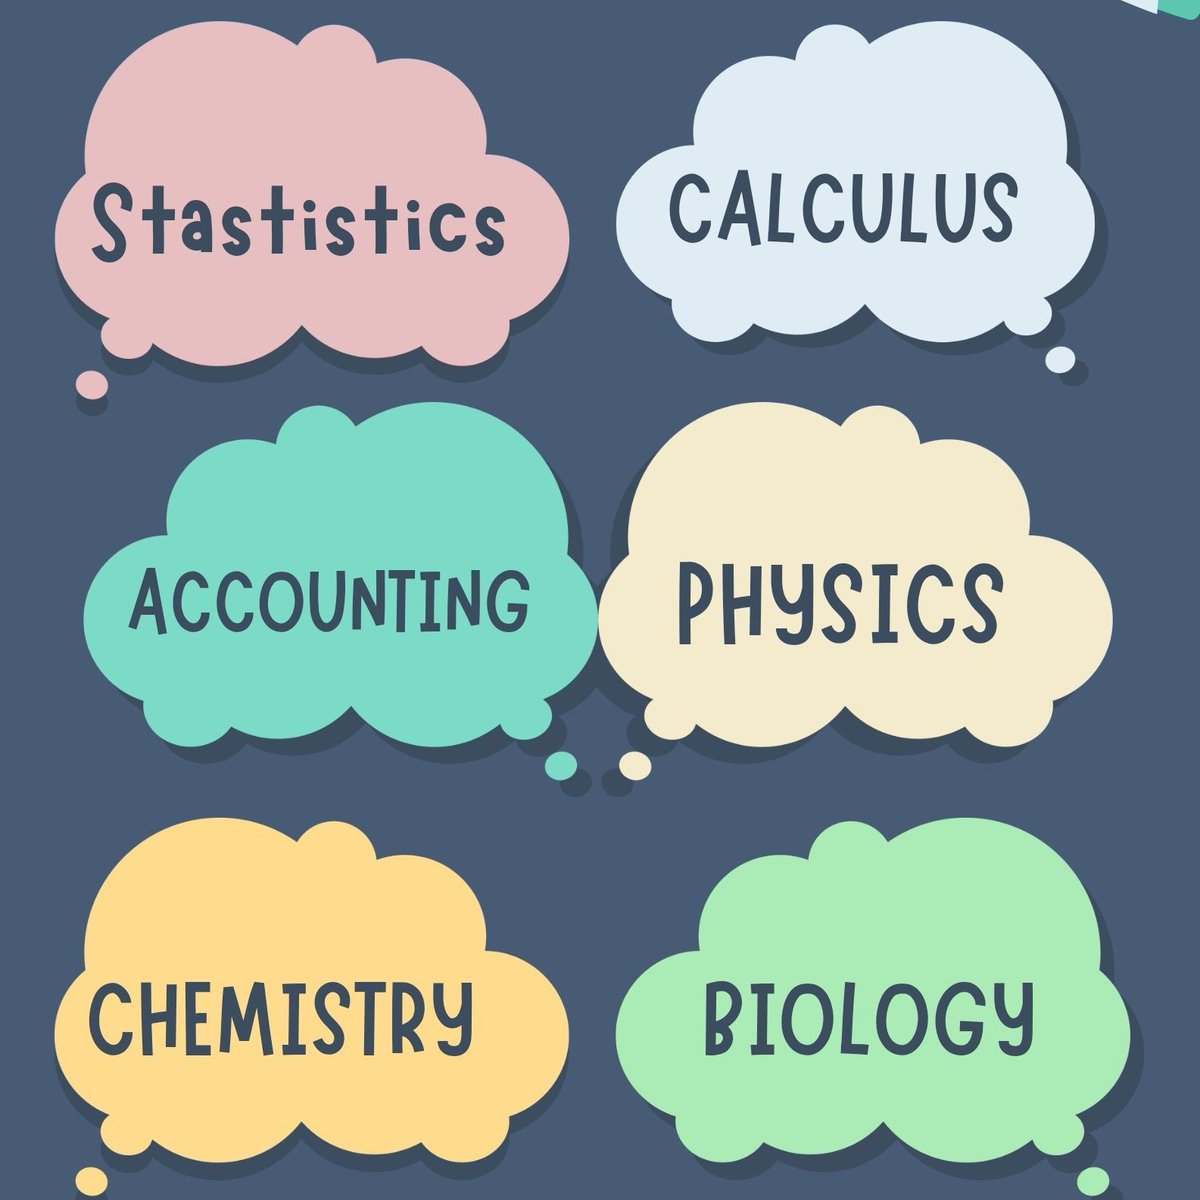 Get online class homework, assignment and exam help in

#EssayPay
Math
Anatomy
#thesiswriting
#Politicalscience
Accounting
#ResearchPapers
Economics
#assignmenthelp
Statistics..
Calculus
#Homeworkhelp
nursing
Finance
#assignmenthelp
#Coursework
#pythonprogramming